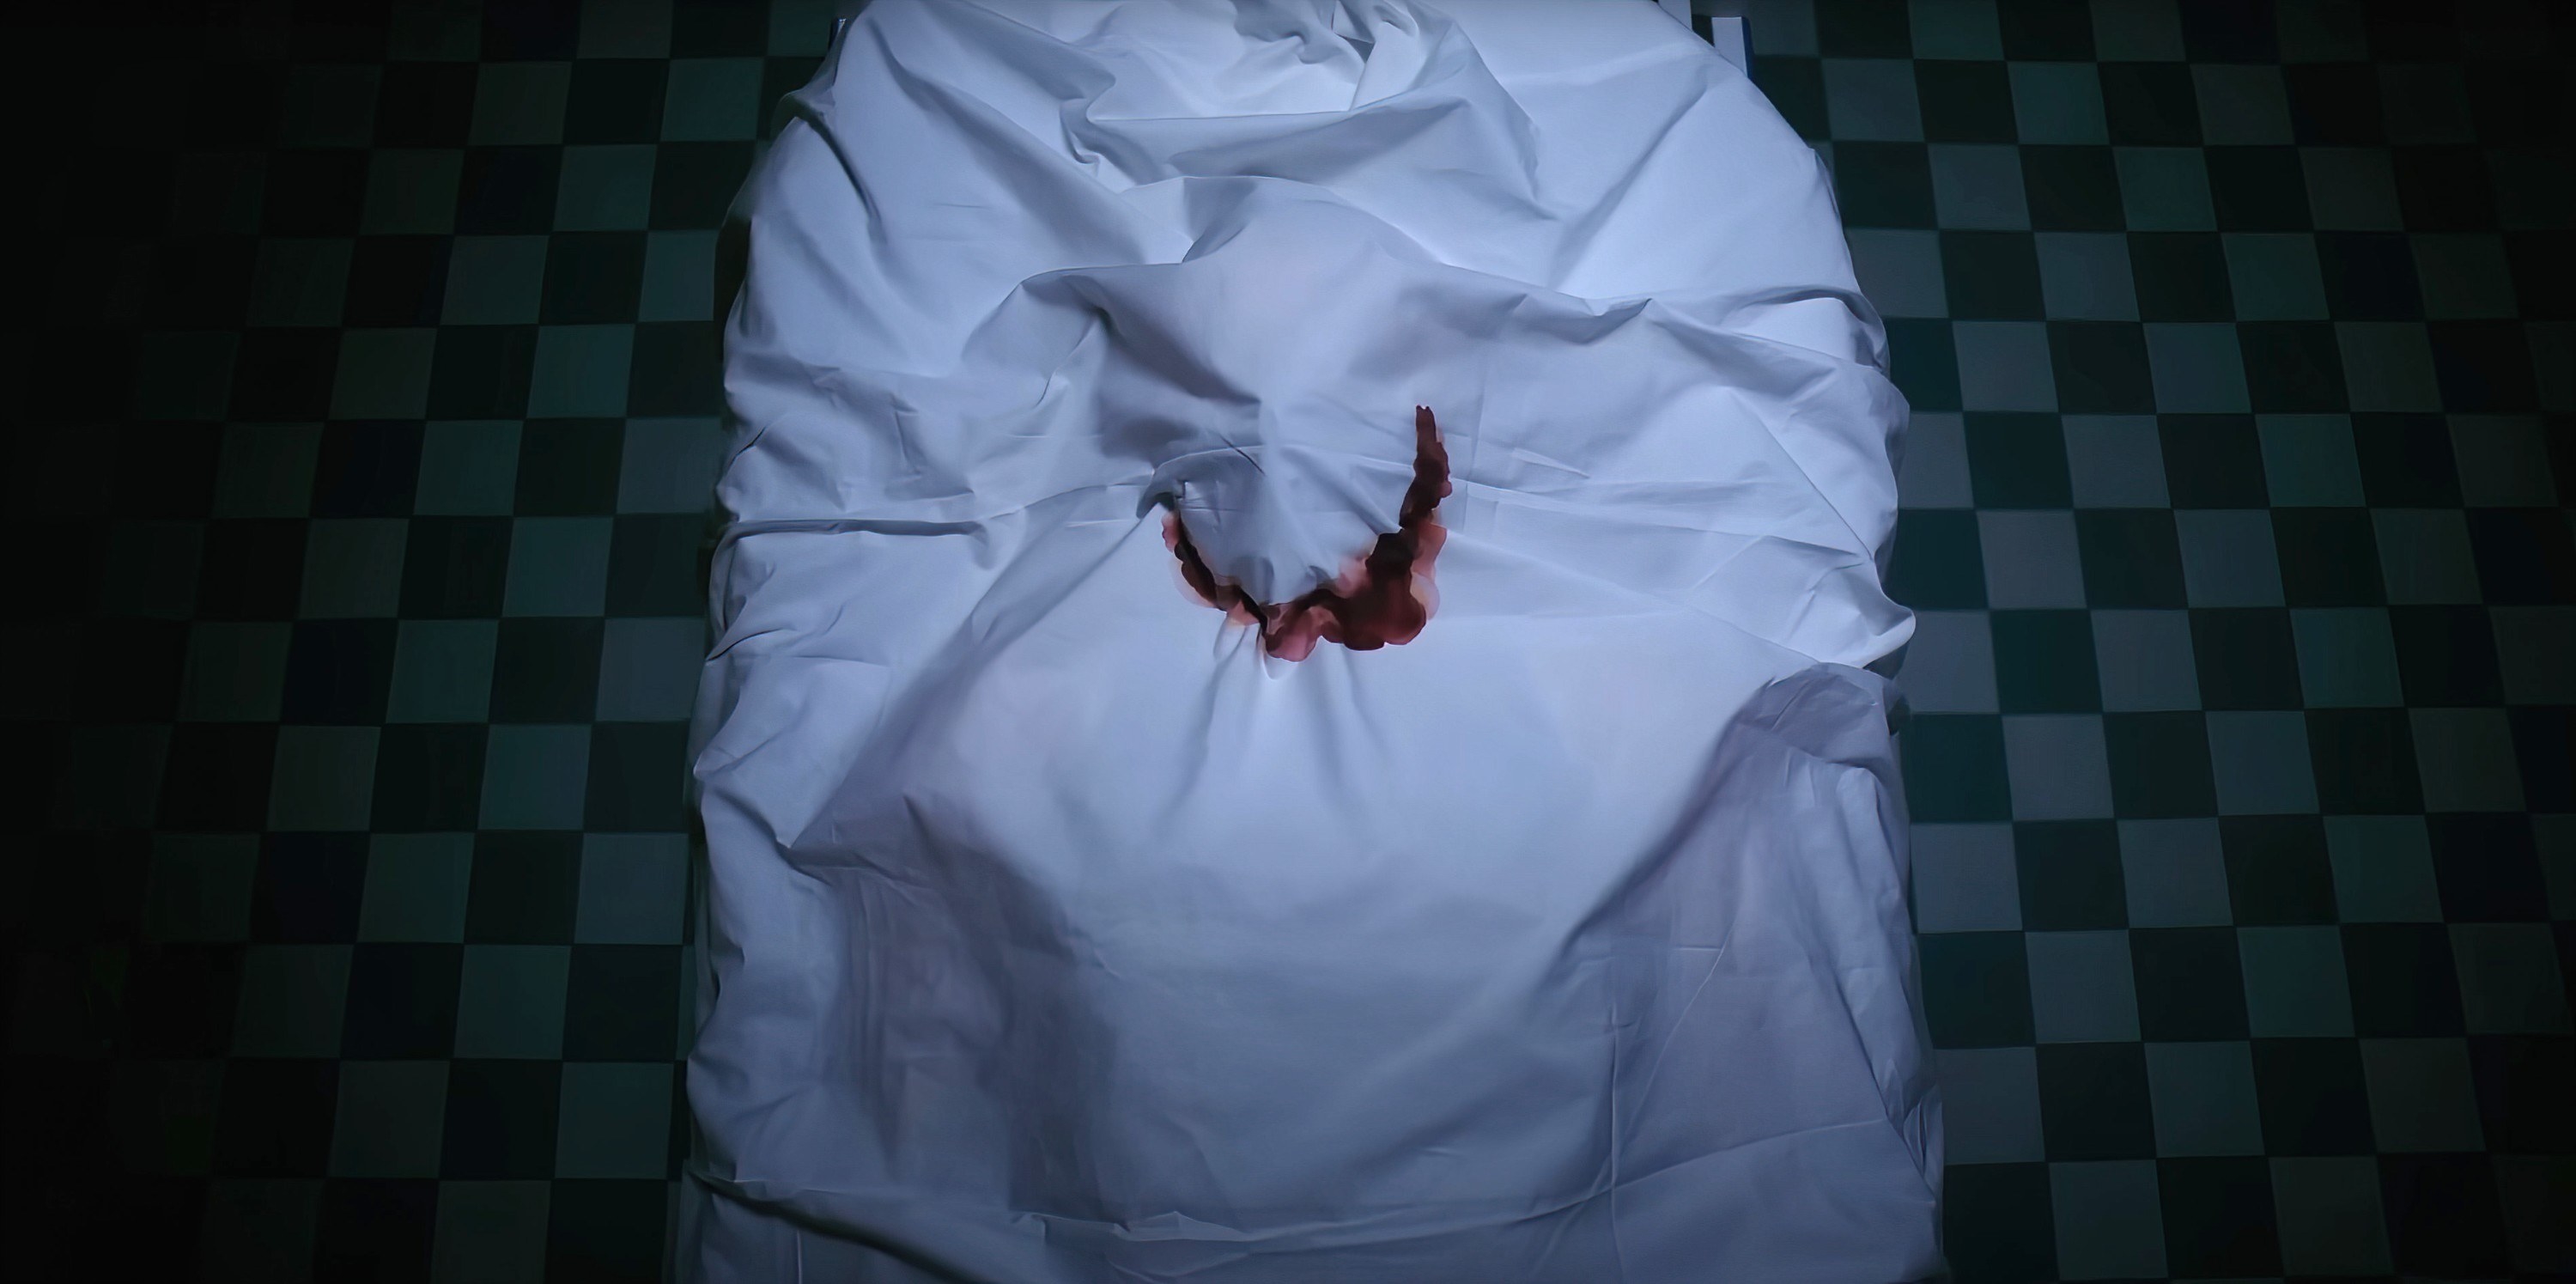 A dead body with a sheet pulled over, bleeding in the shape of a smile